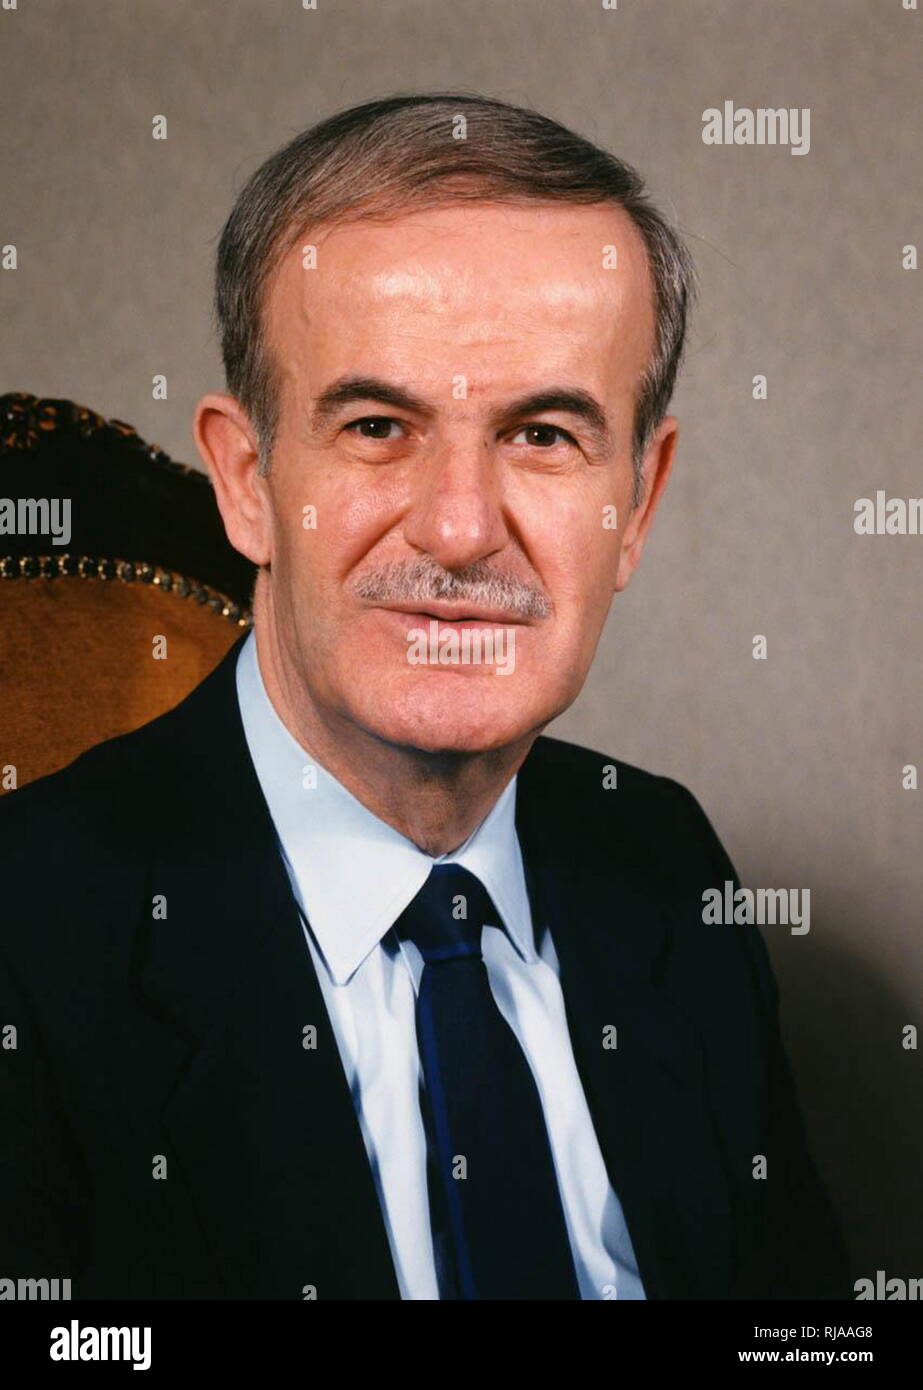 Hafez al-Assad (1930 – 2000);Syrian, politician, and general who served as President of Syria from 1971 to 2000. He was also Prime Minister from 1970 to 1971, as well as Regional Secretary of the Regional Command of the Syrian Regional Branch of the Arab Socialist Ba'ath Party and Secretary General of the National Command of the Ba'ath Party from 1970 to 2000. Stock Photo